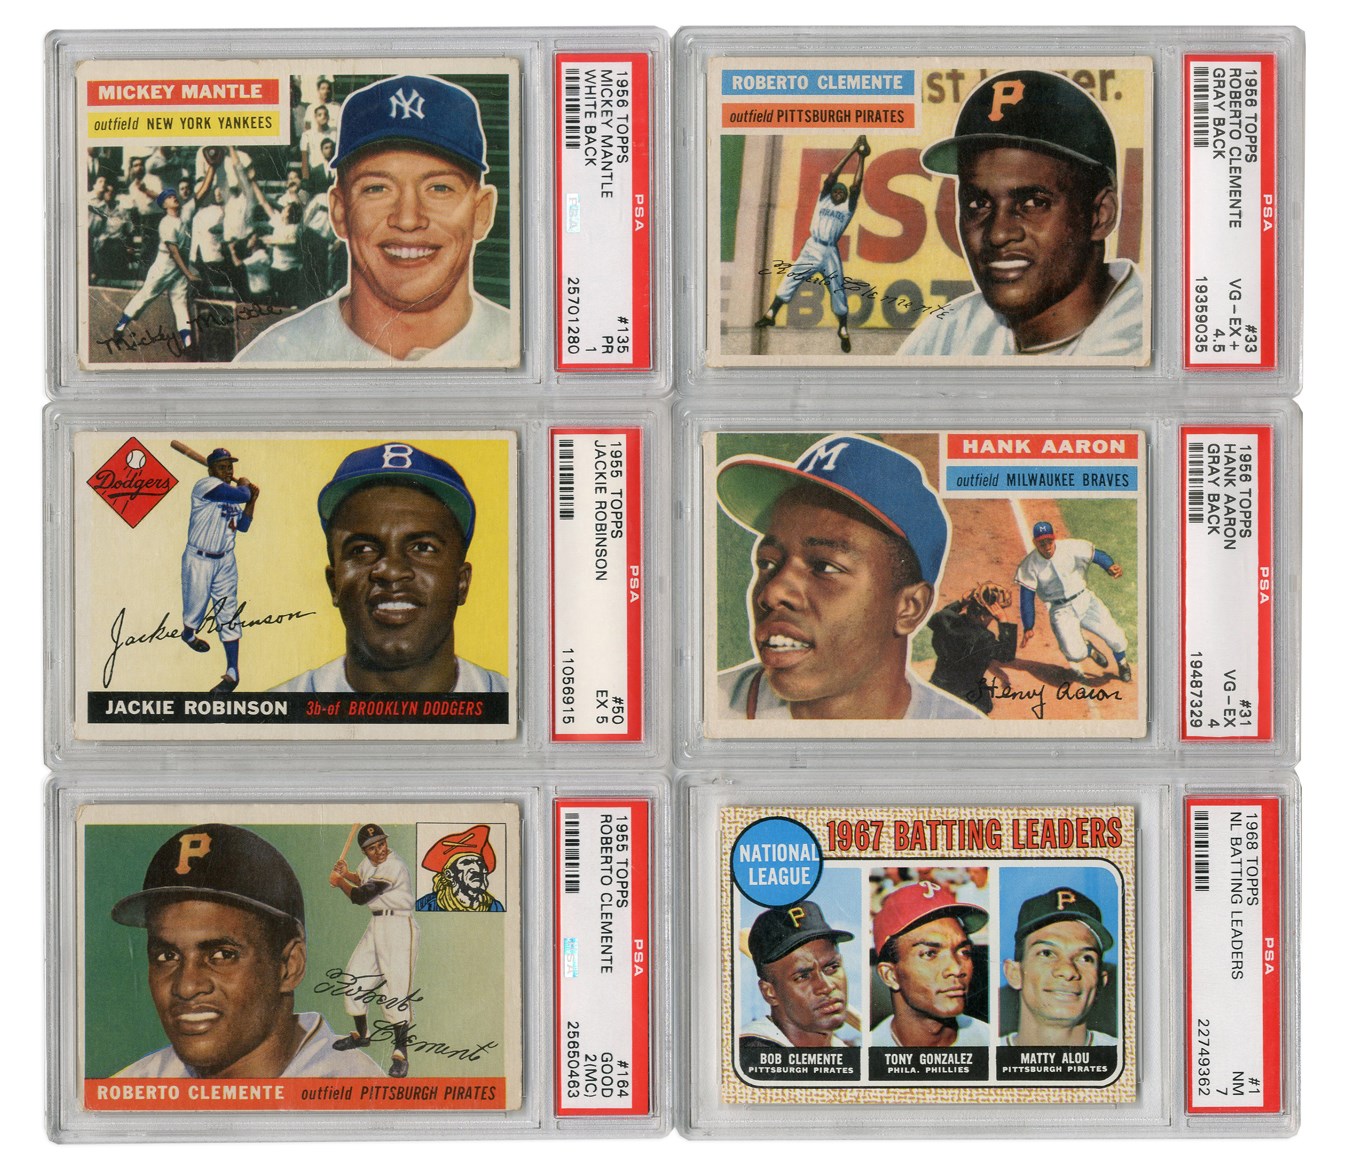 Baseball and Trading Cards - 1950s-60s Topps PSA Graded HOFers Collection with Clemente Rookie